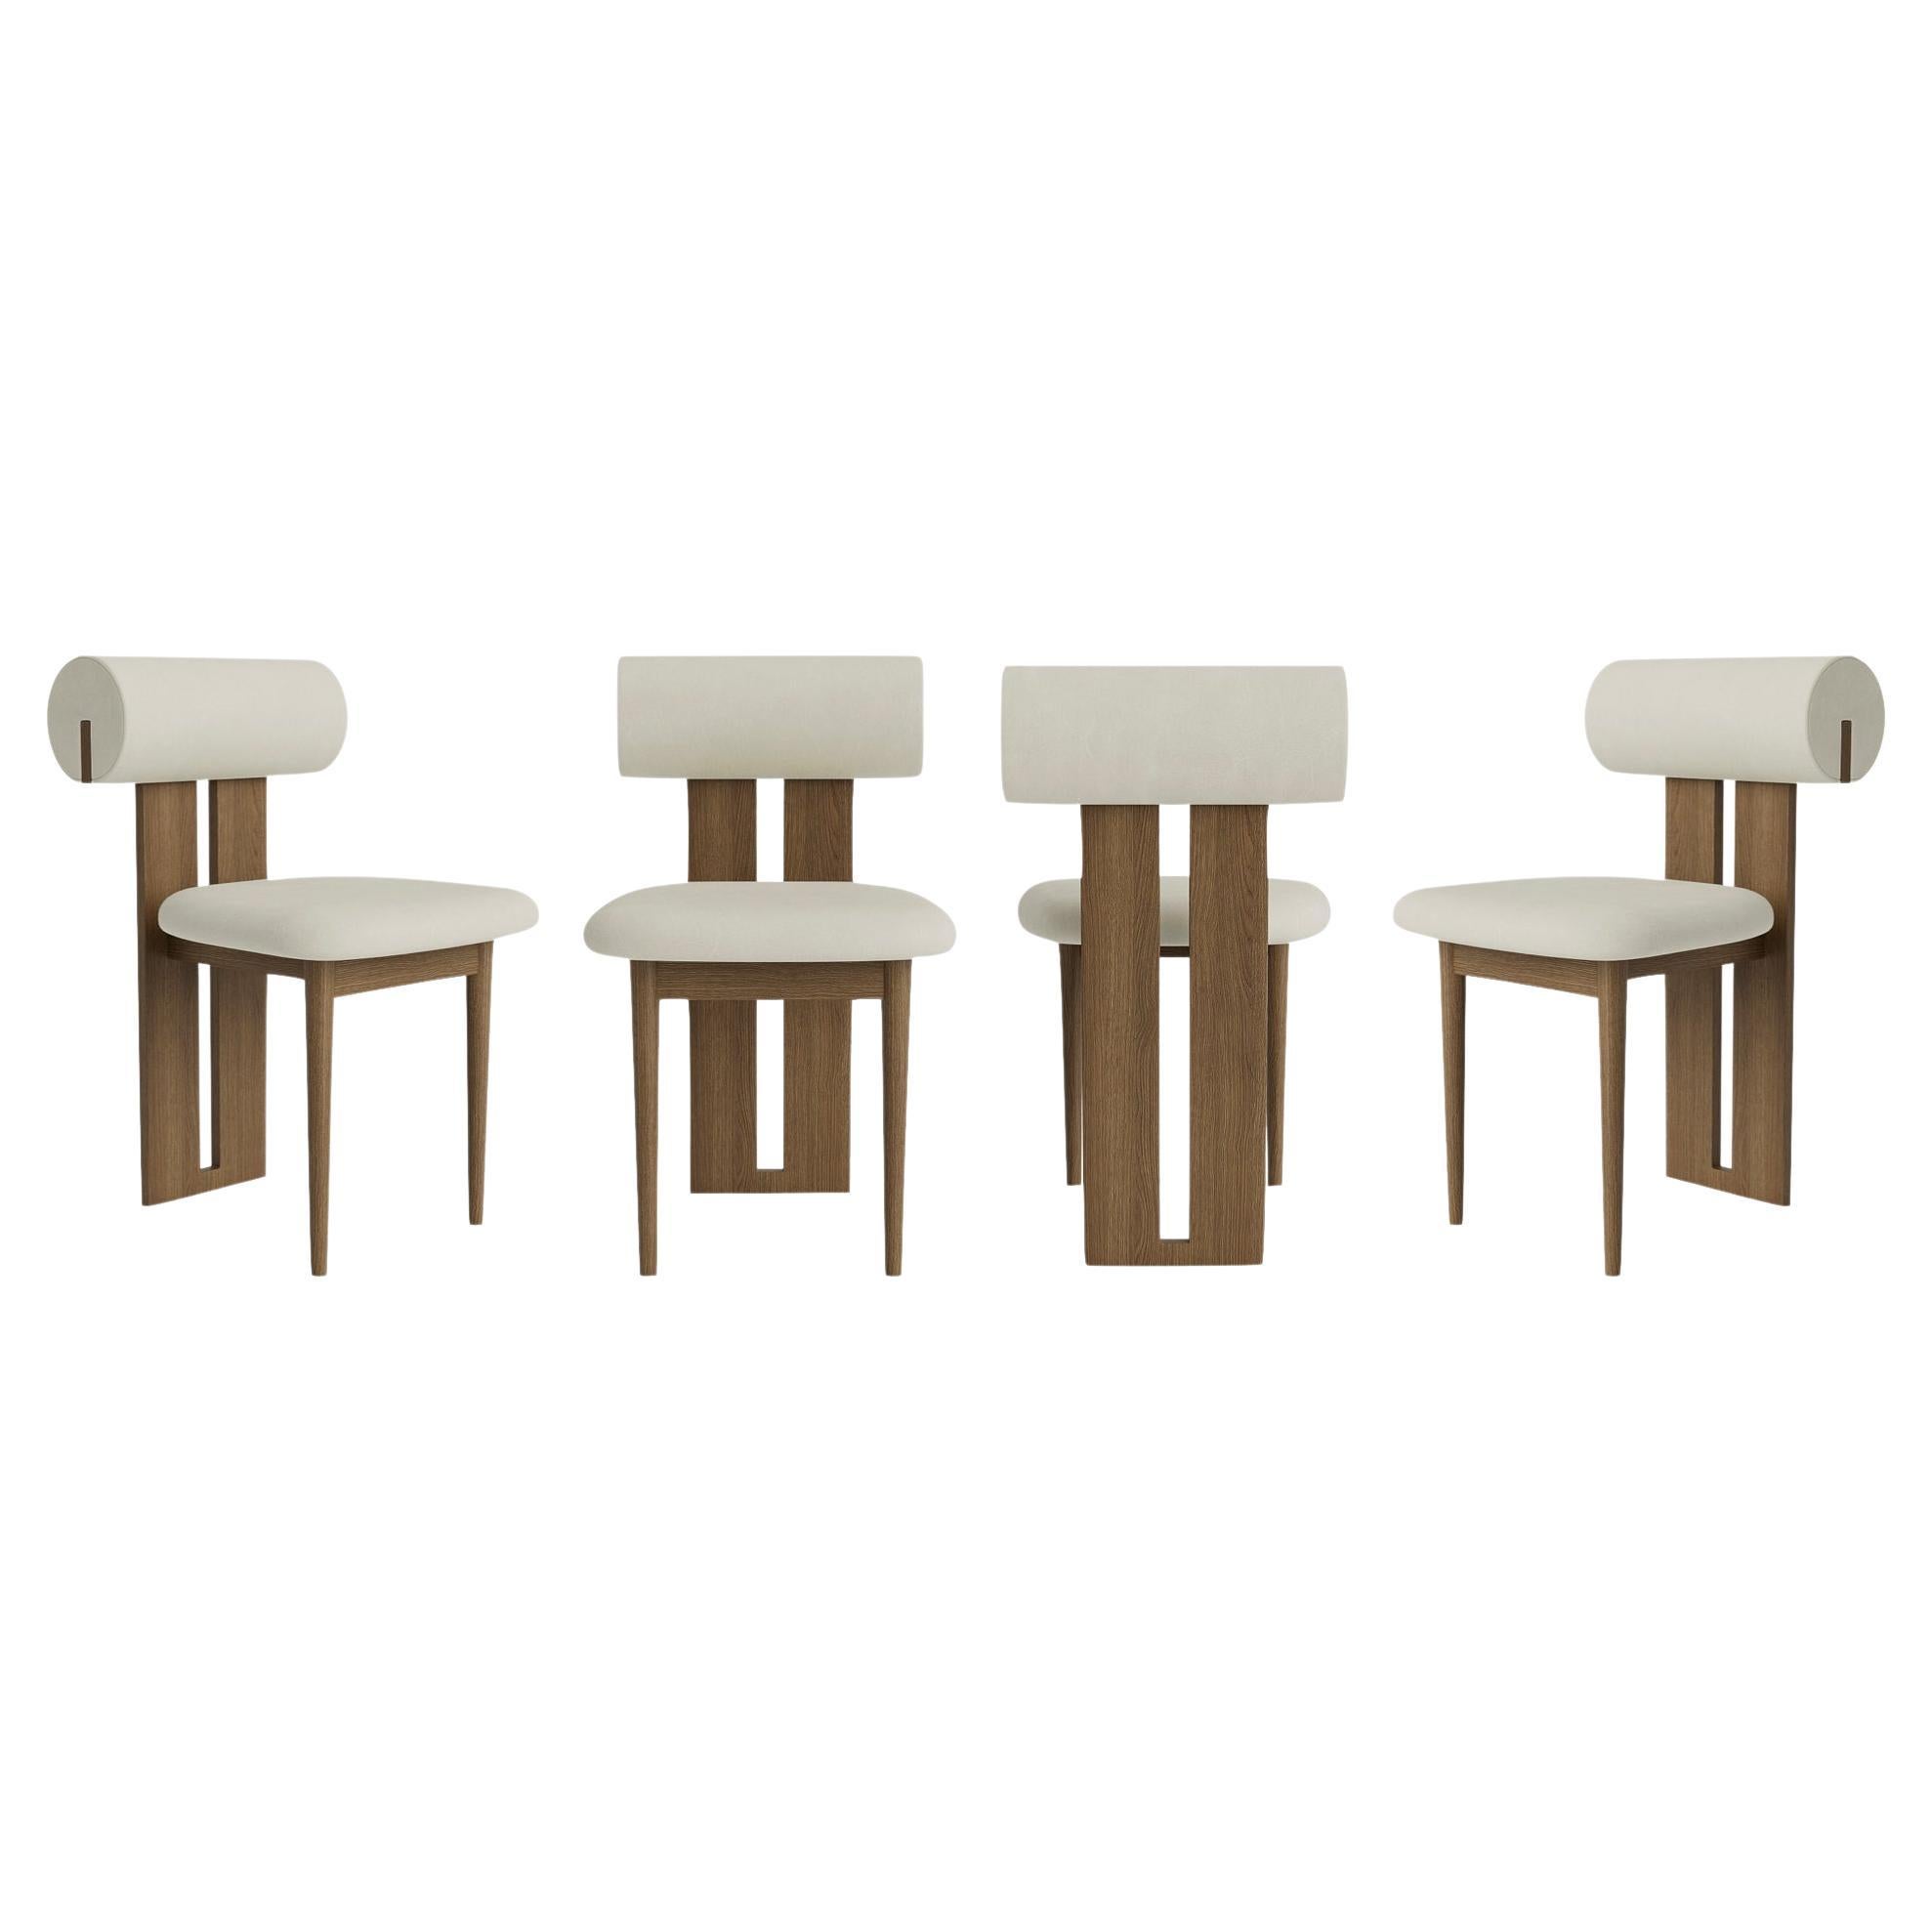 Set of 4 Chairs 'Hippo' by Norr11, Light Smoked Oak, Spectrum Leather, Mineral For Sale